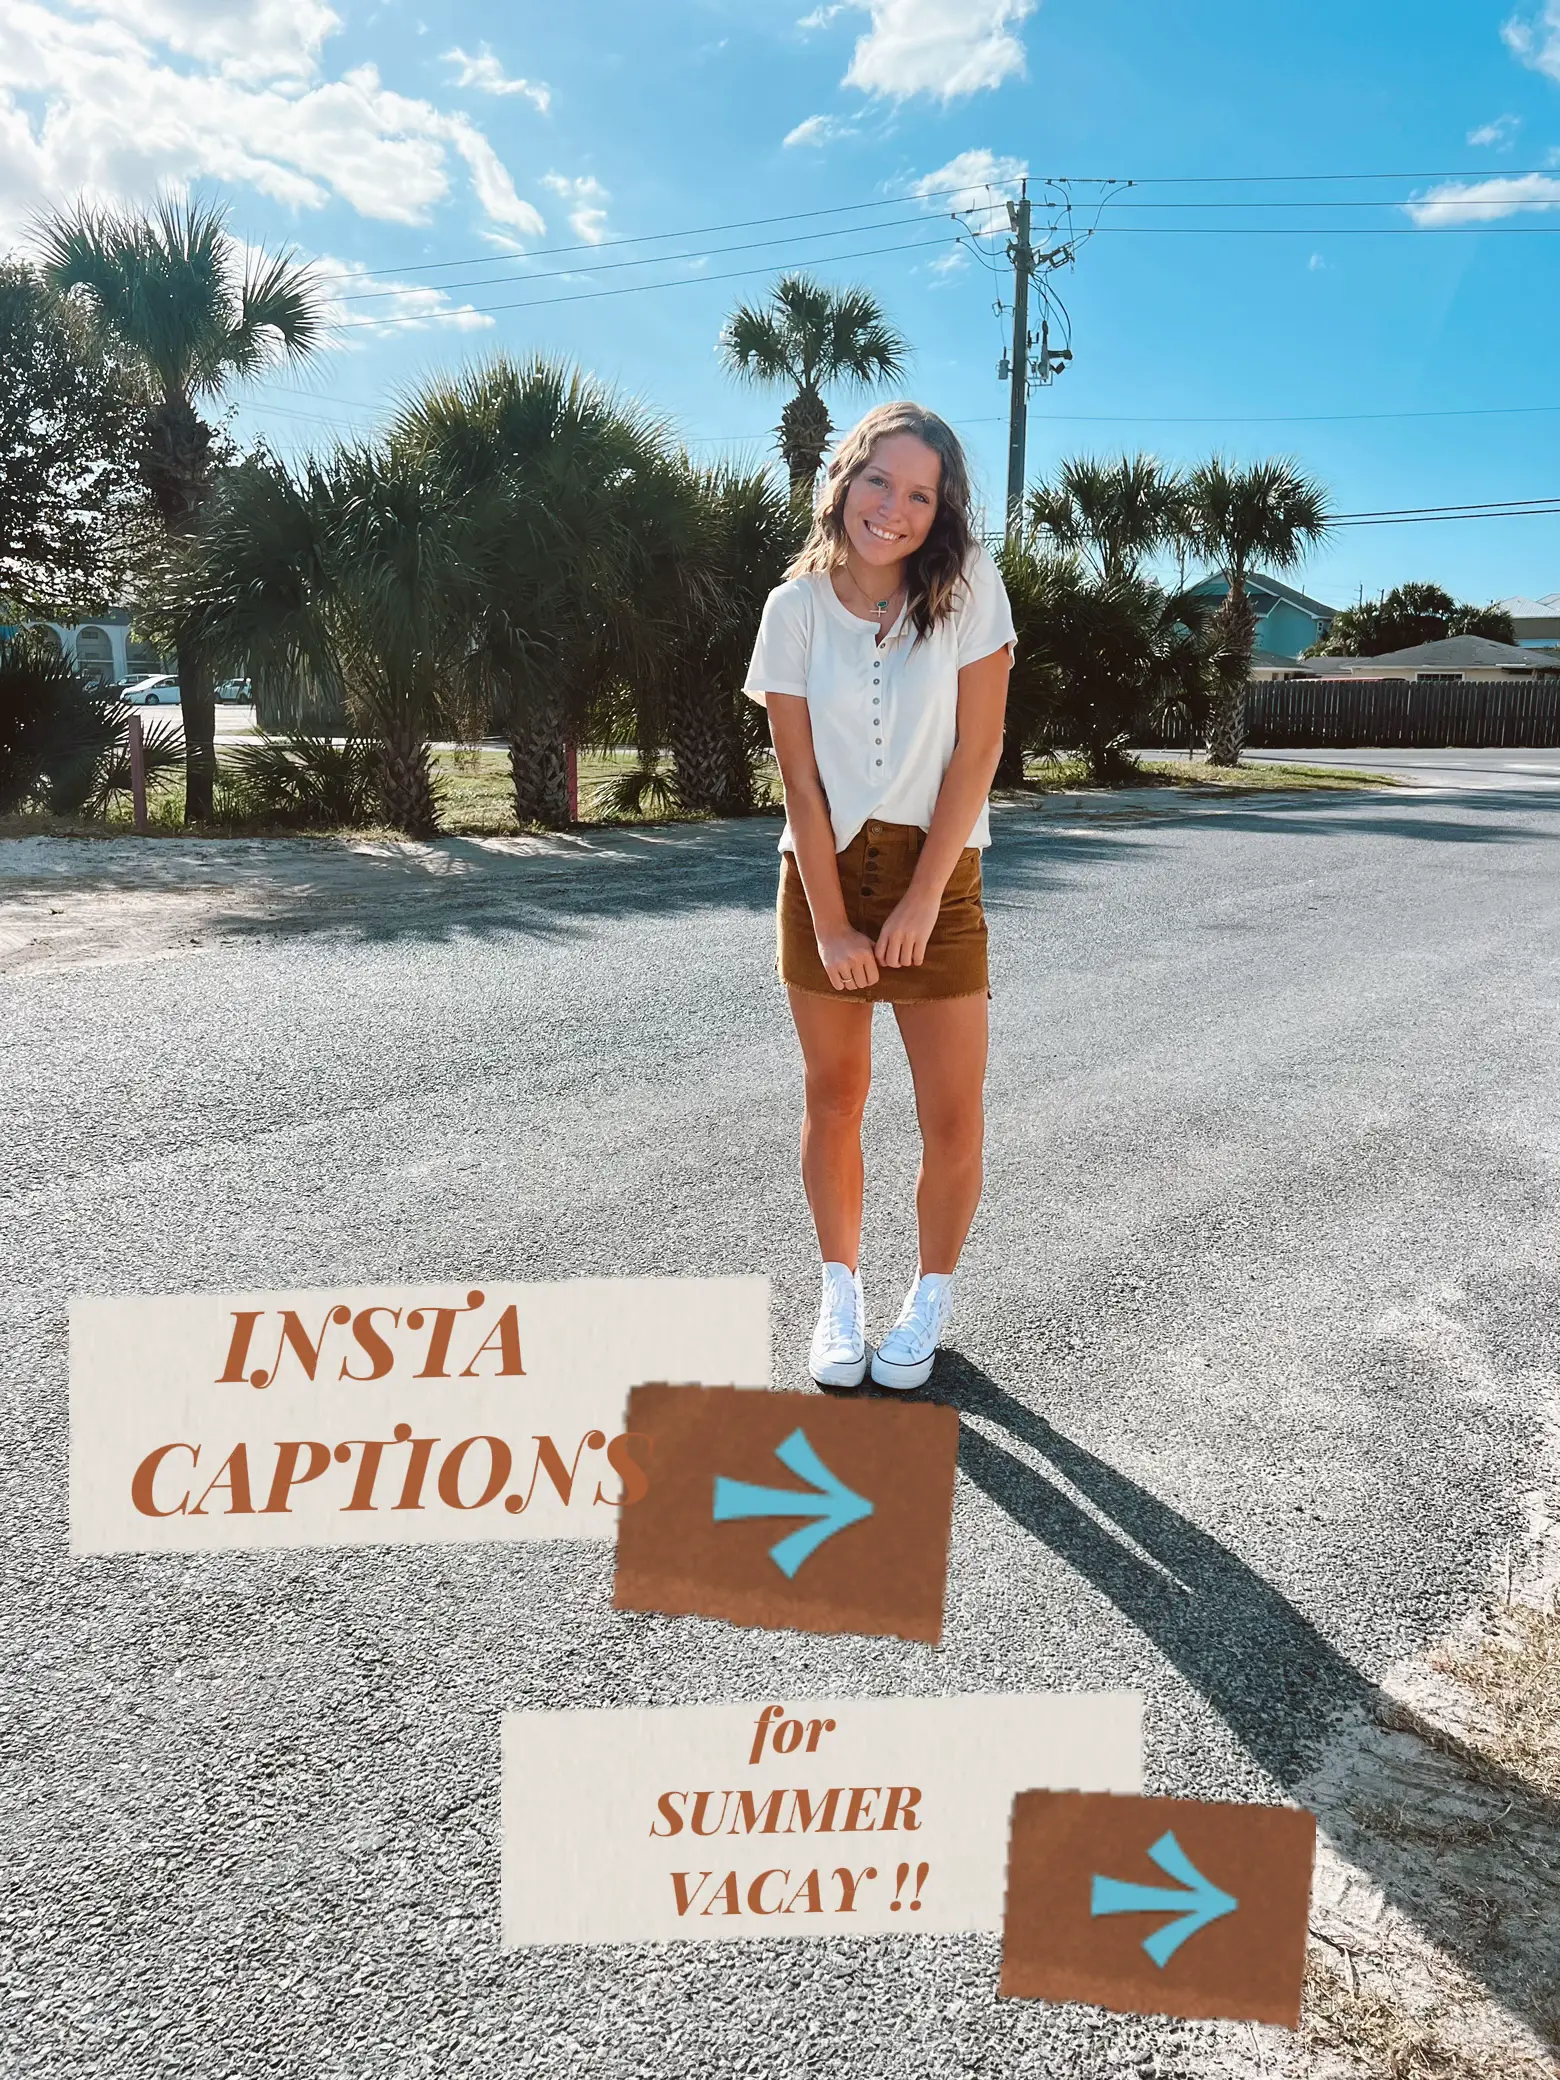  A woman is standing in a parking lot with a sign that says "InSTA CAPTION for SUMMER VACAY".